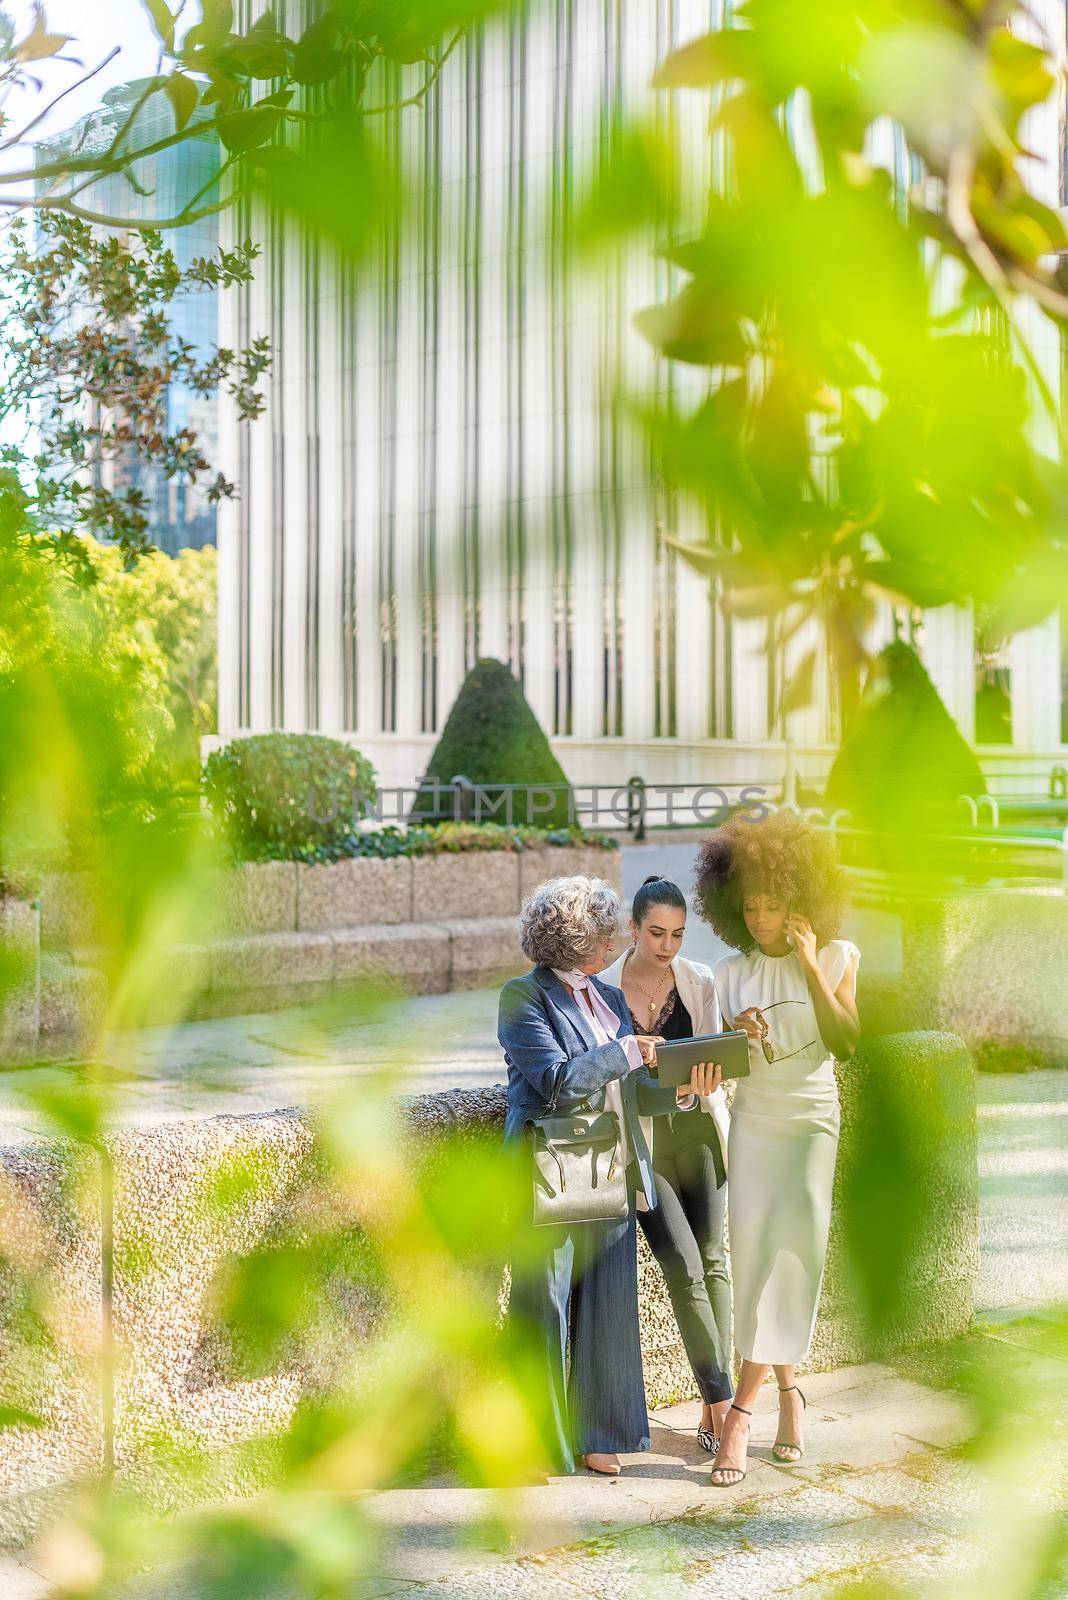 three businesswomen in the background looking at a tablet, blurred leaves in the front